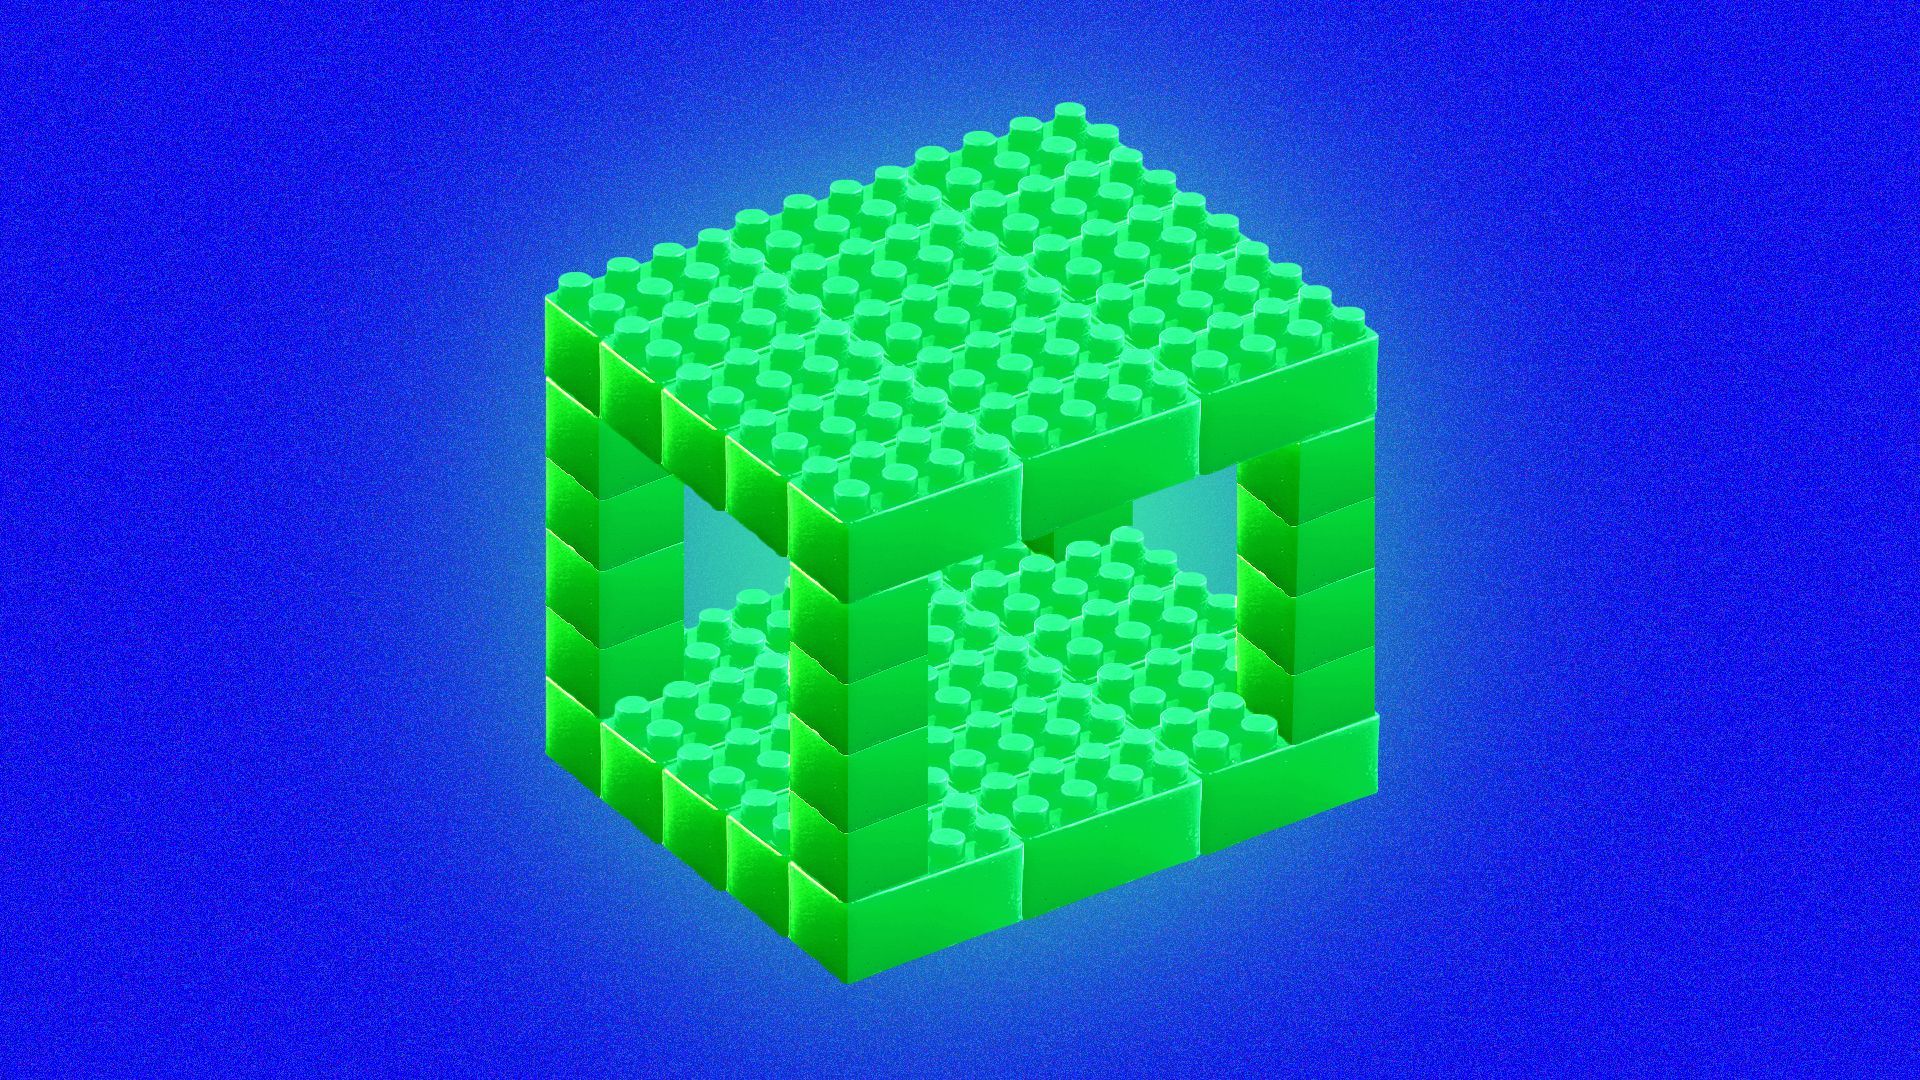 Illustration of a three dimensional cube built from plastic building blocks